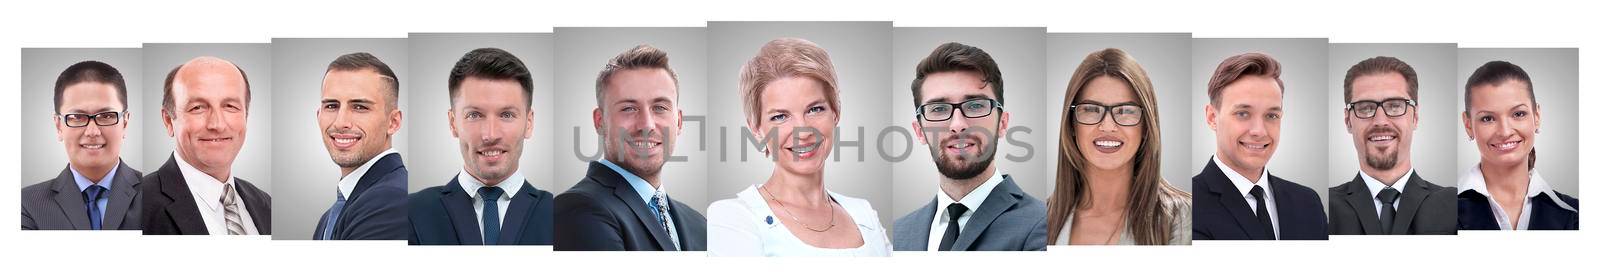 panoramic collage of portraits of successful business people by asdf